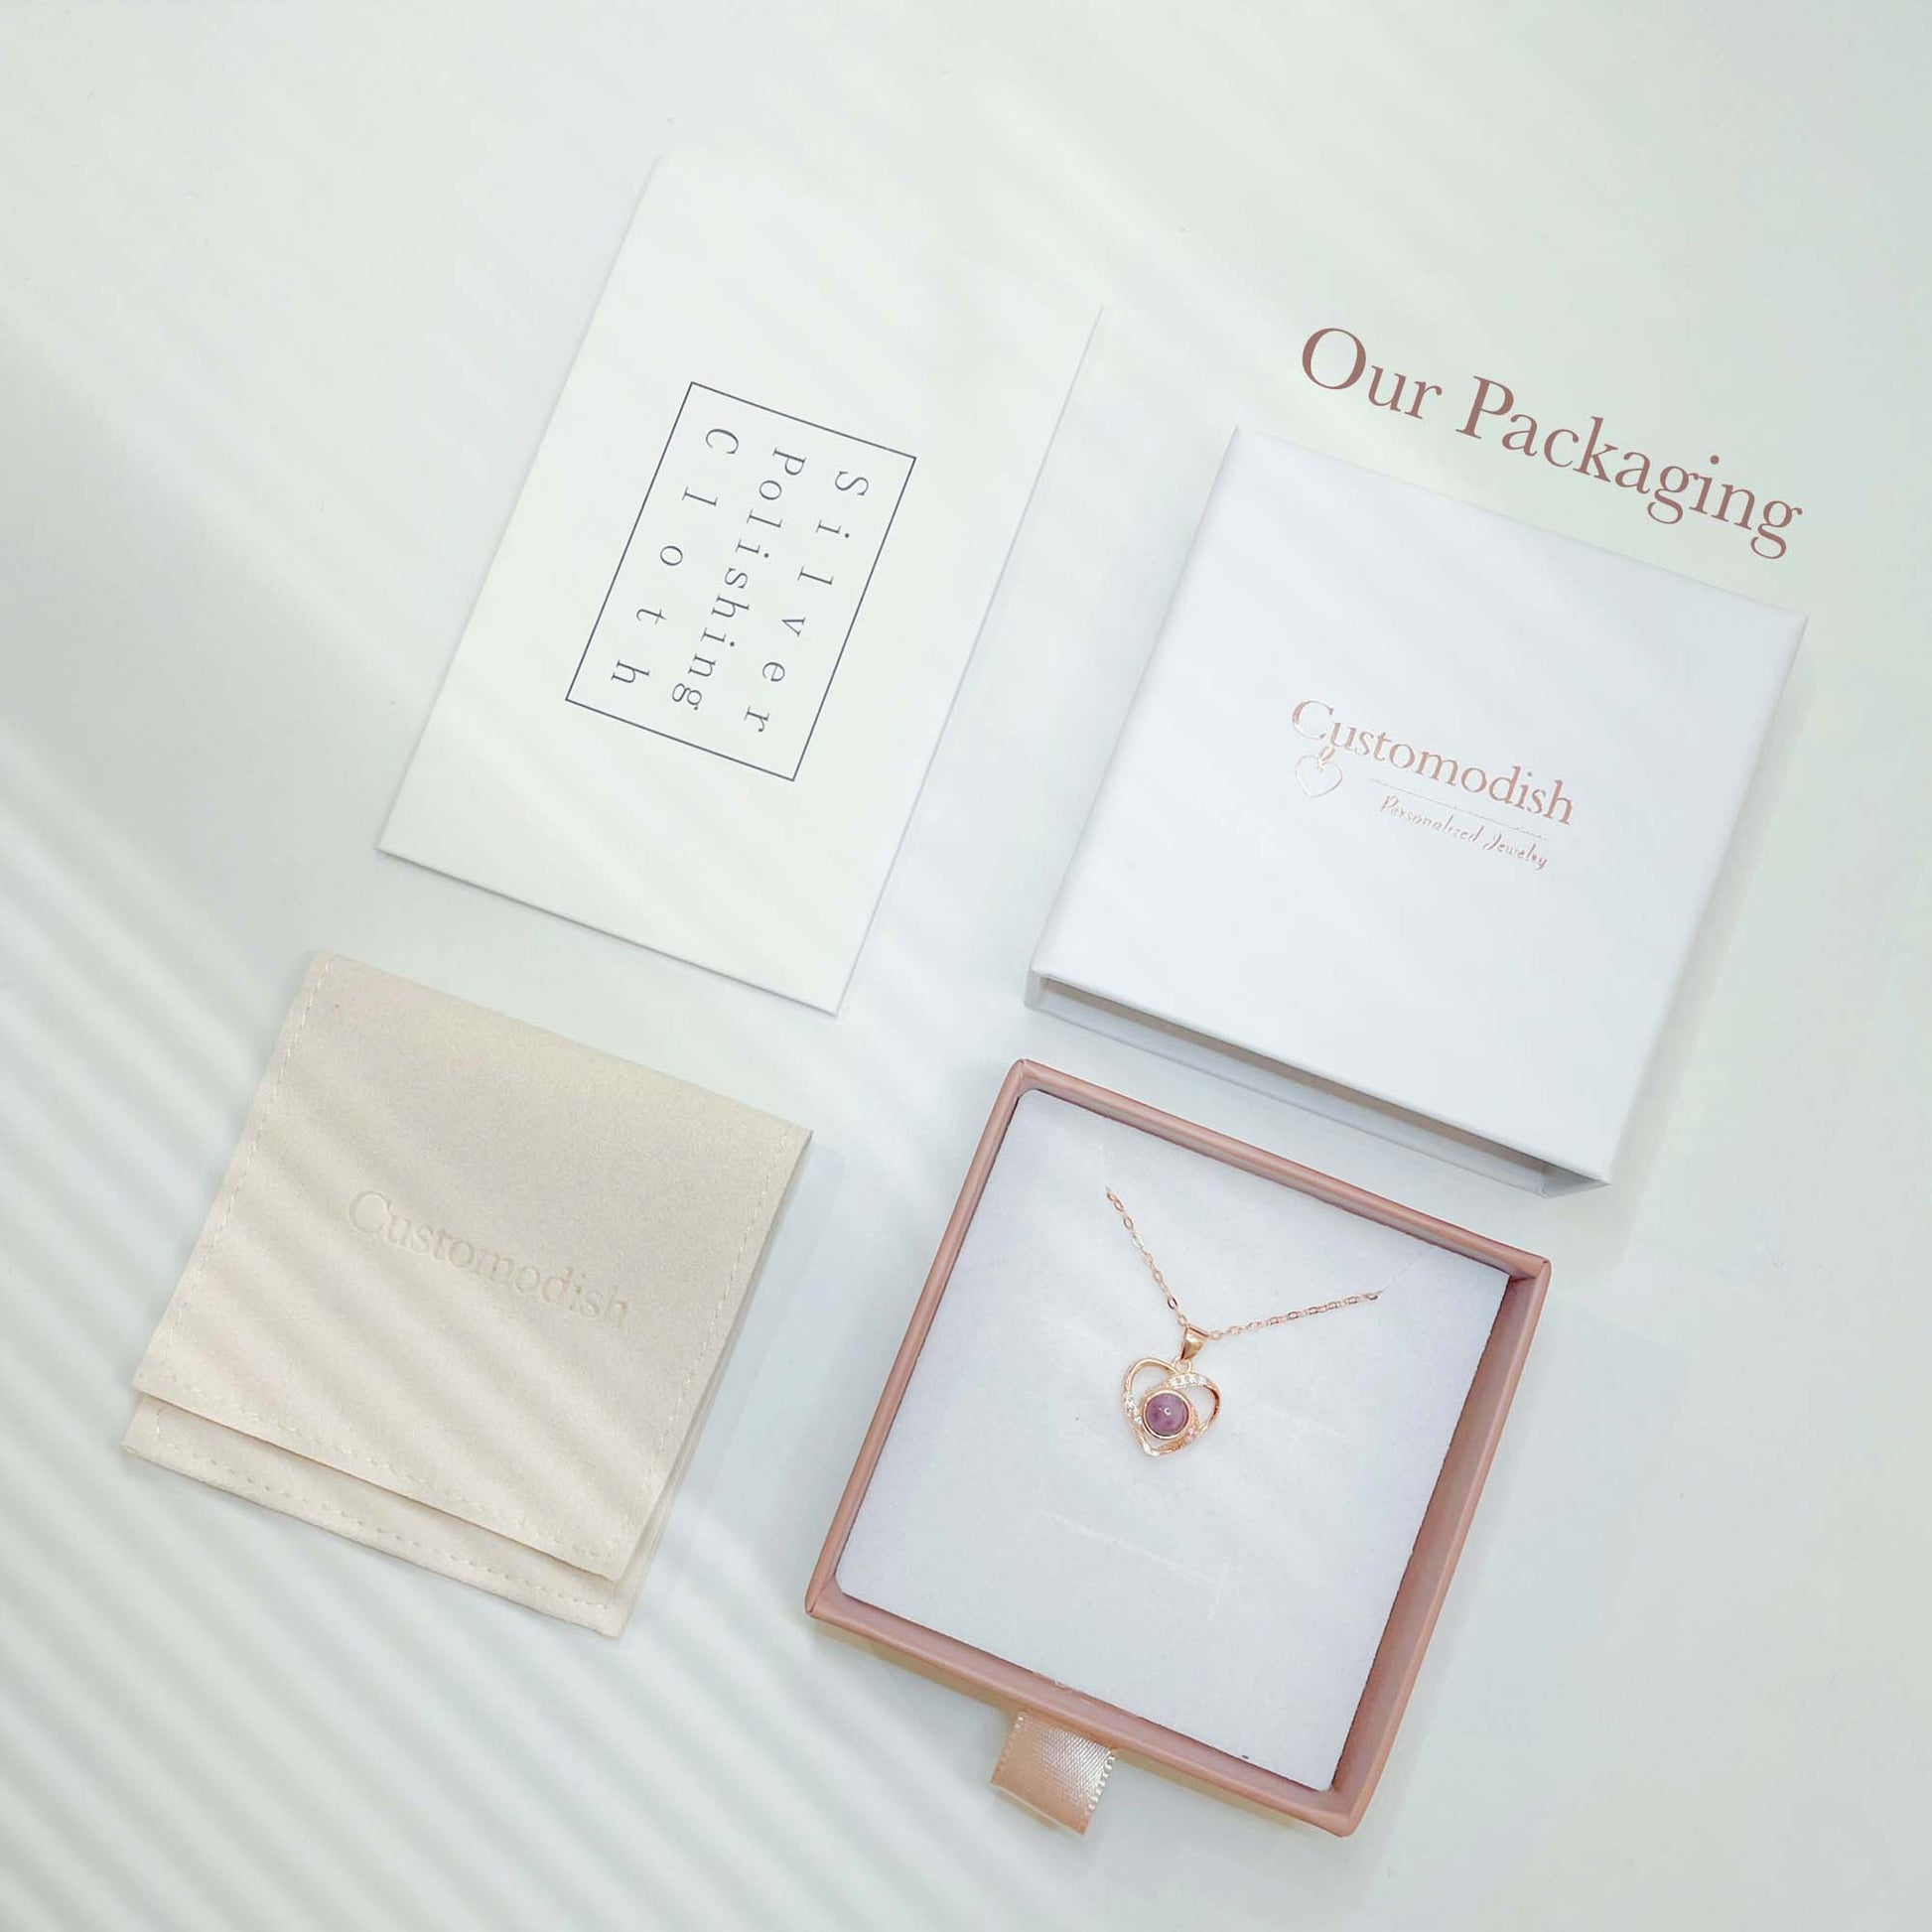 All our personalized photo necklaces come with nice gift packaging.